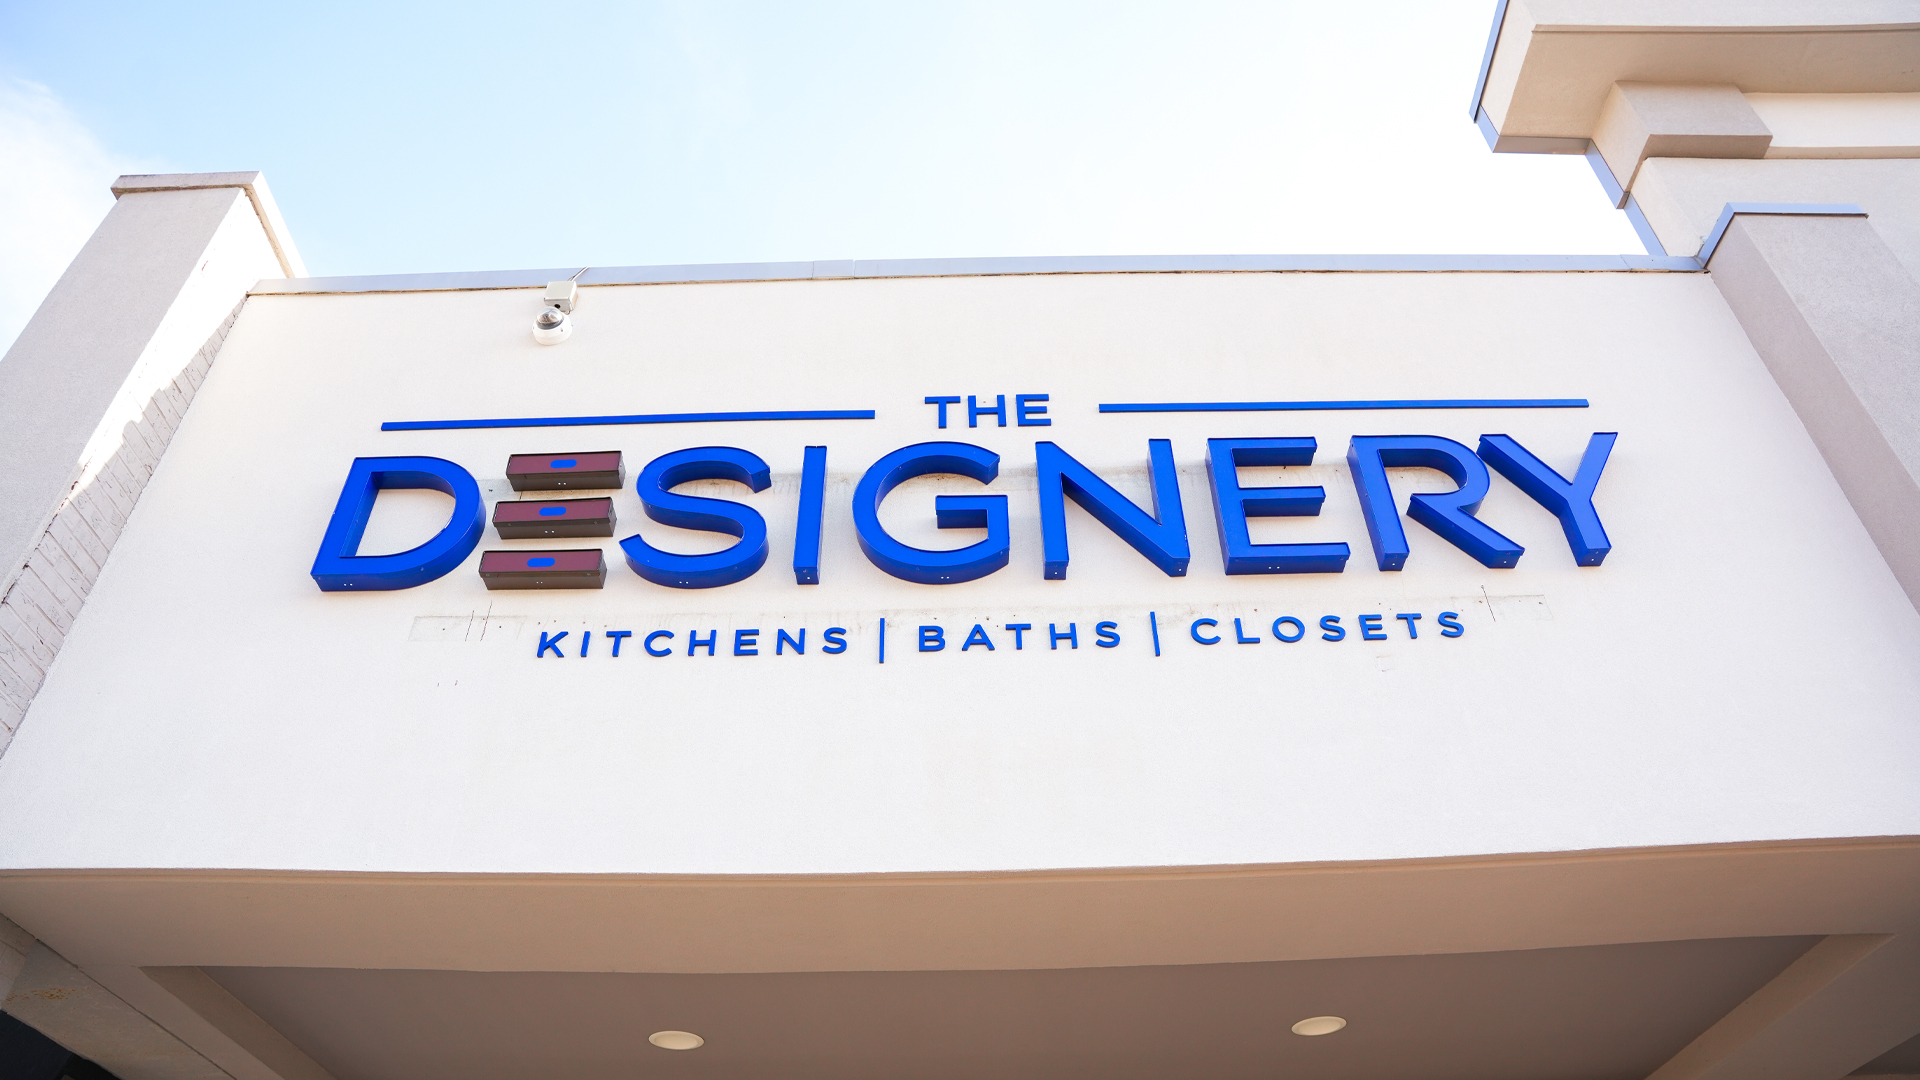 Close up of entry signage that reads 'The Designery Kitchens, Baths, Closets' at The Designery showroom